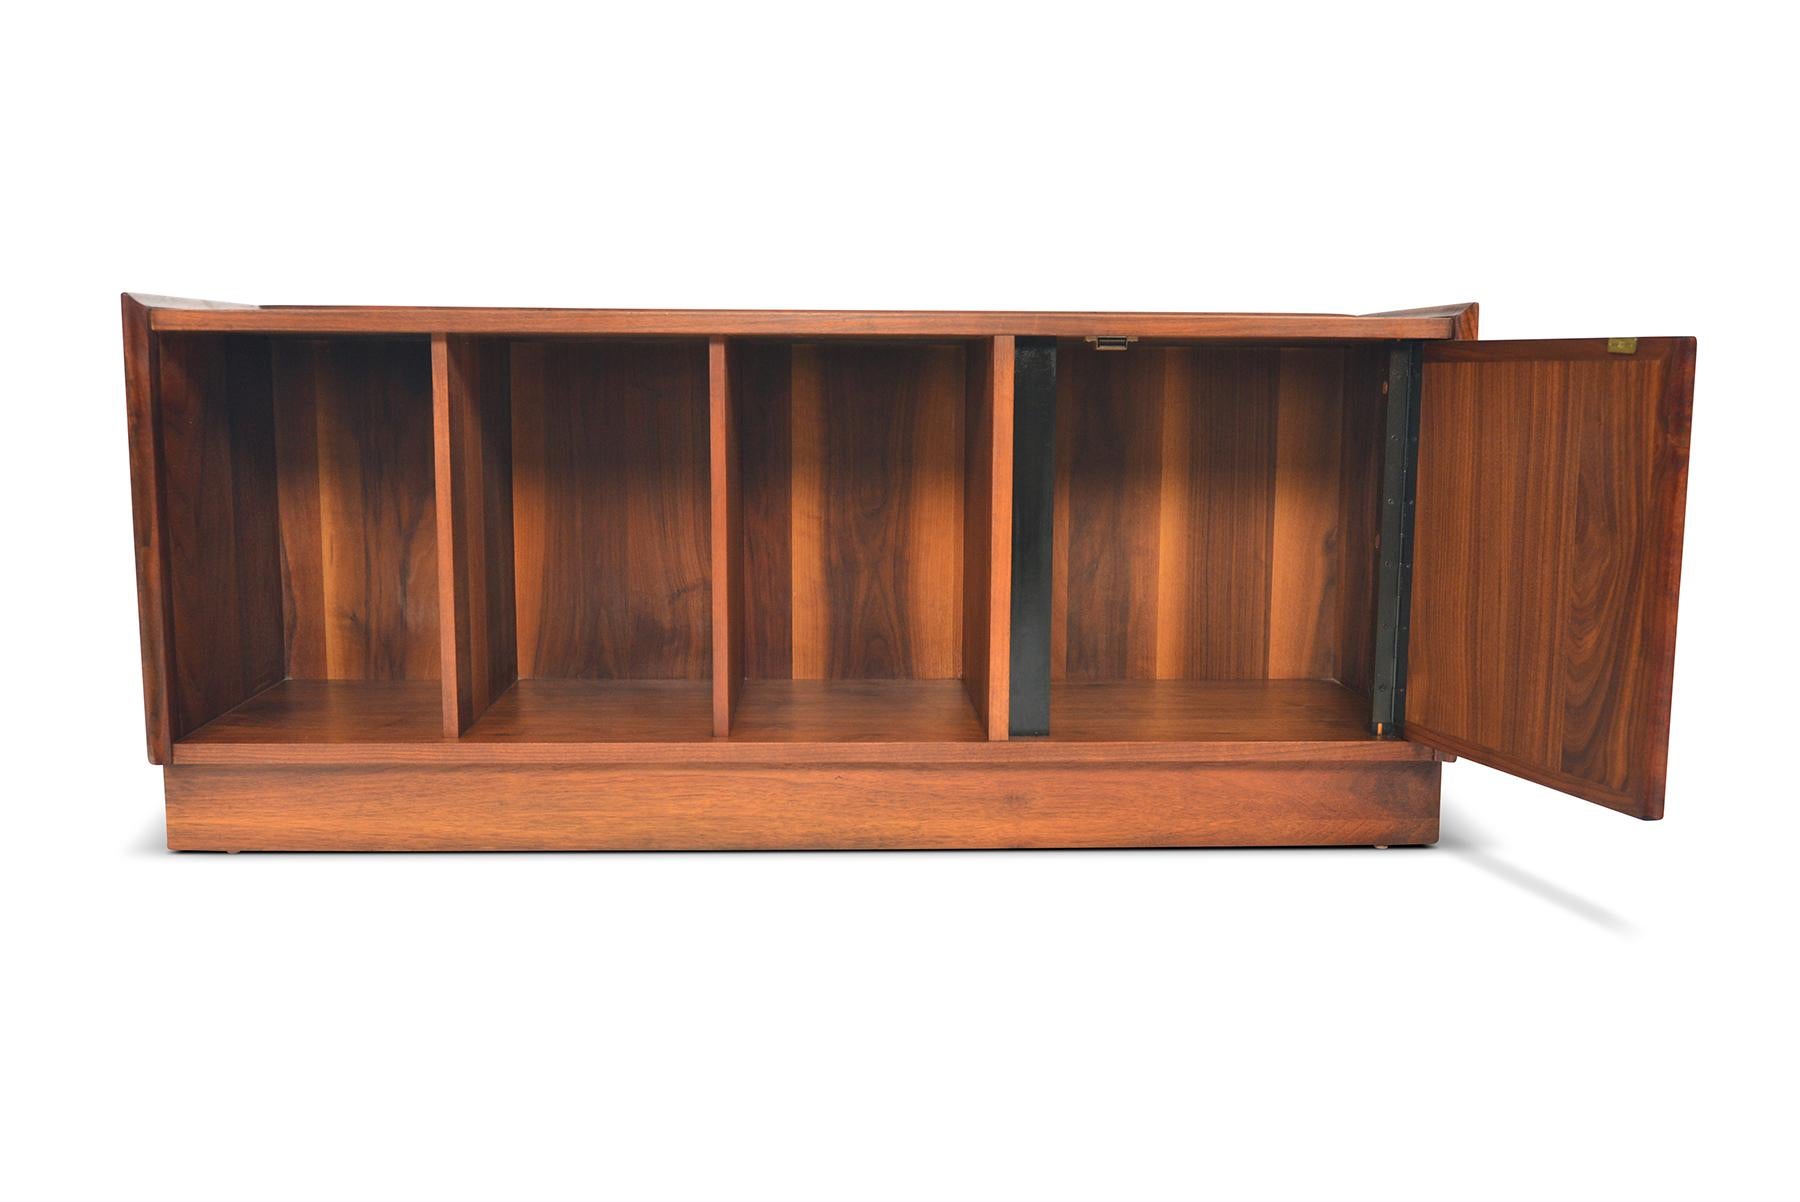 This American Mid-Century Modern walnut record storage cabinet was designed by Merton Gershun for Dillingham as part of the ‘Esprit’ collection. This sleek piece is sought after by midcentury collectors and audiophiles alike. Designed in the 1960s,